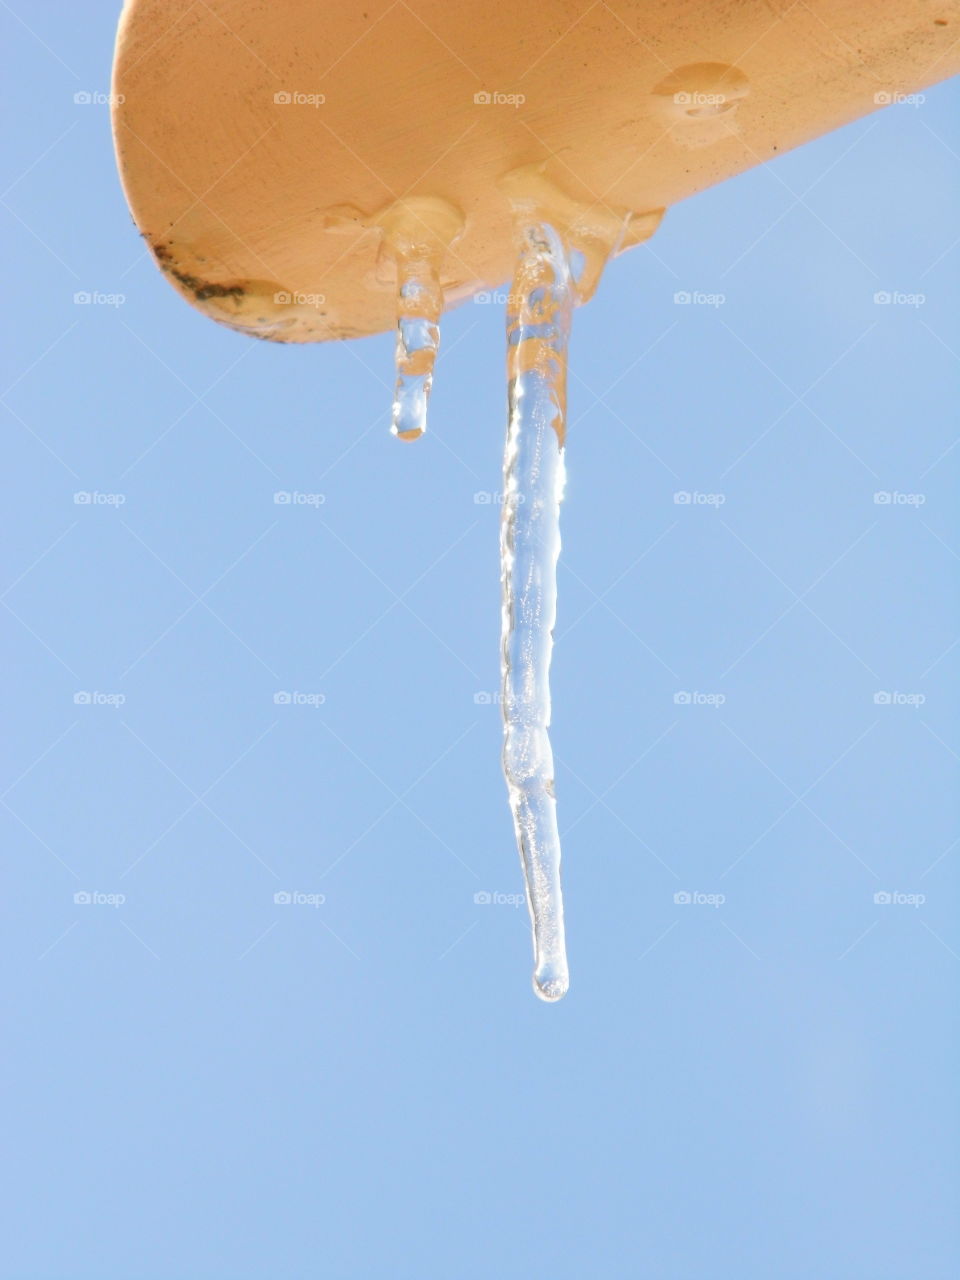 Ice from the roof and beautiful blue sky background